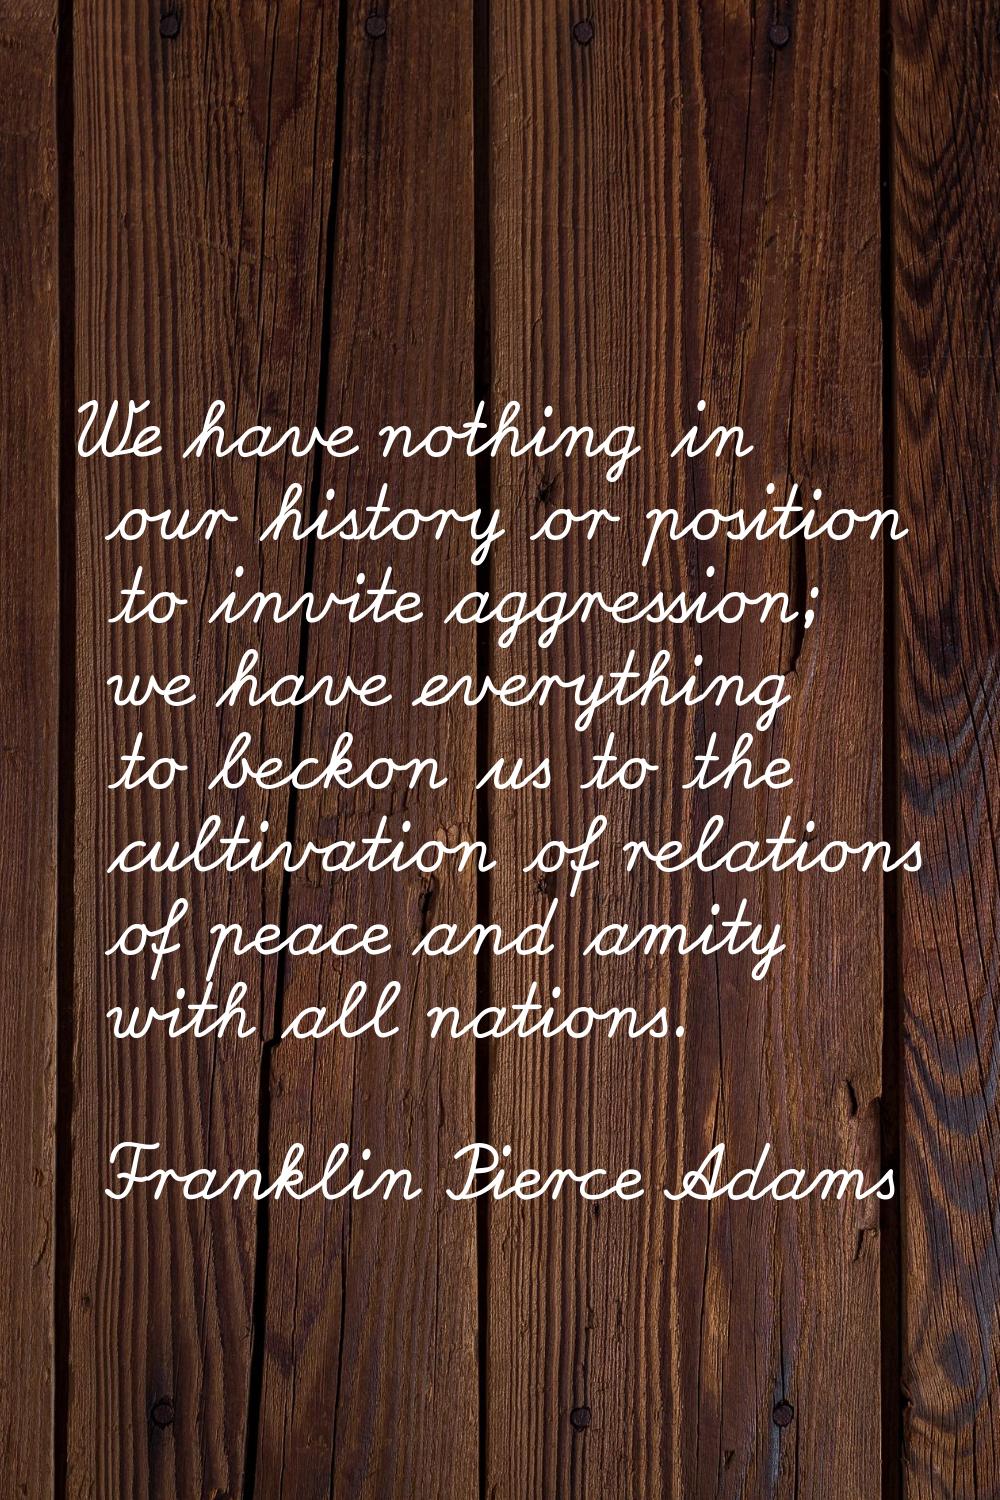 We have nothing in our history or position to invite aggression; we have everything to beckon us to